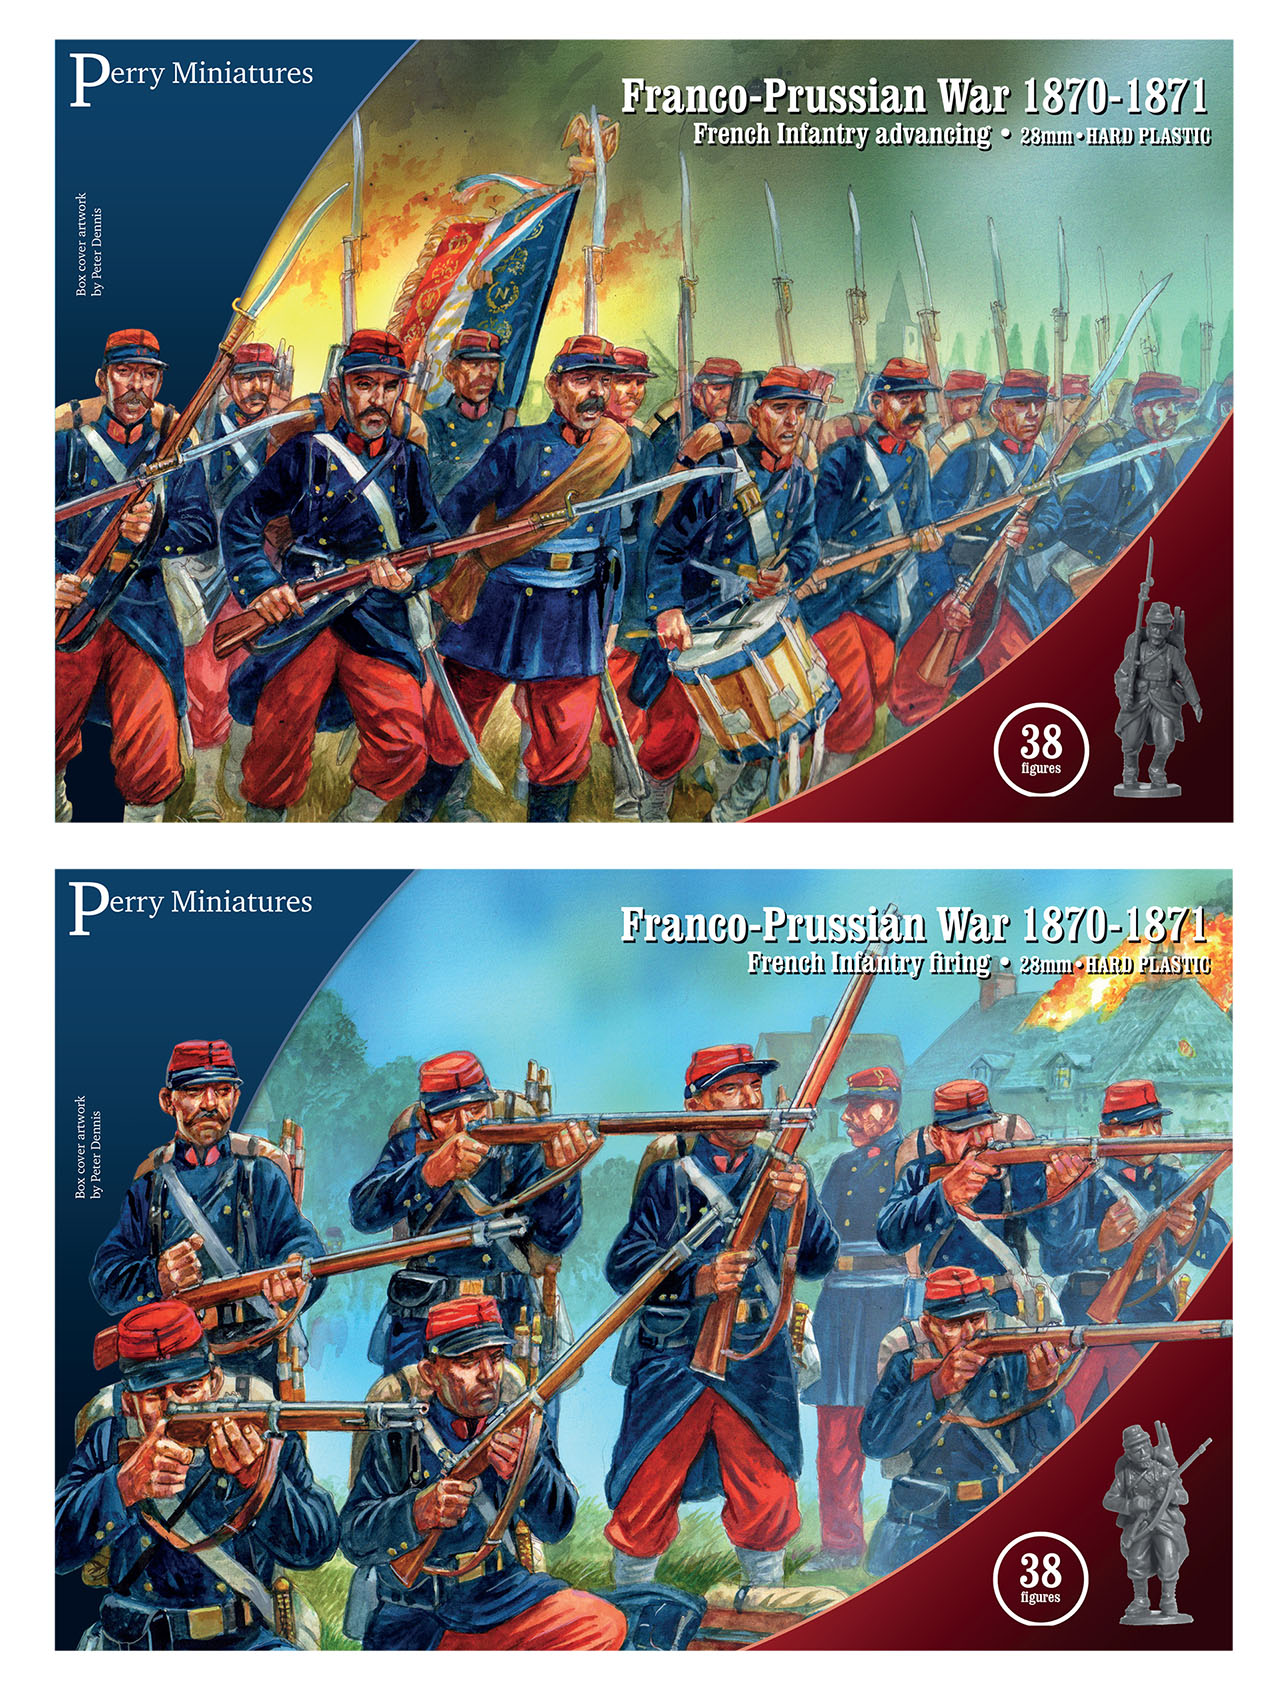 Kit Check - Russian Napoleonic Uhlans - 28mm Plastic - Perry Miniatures 